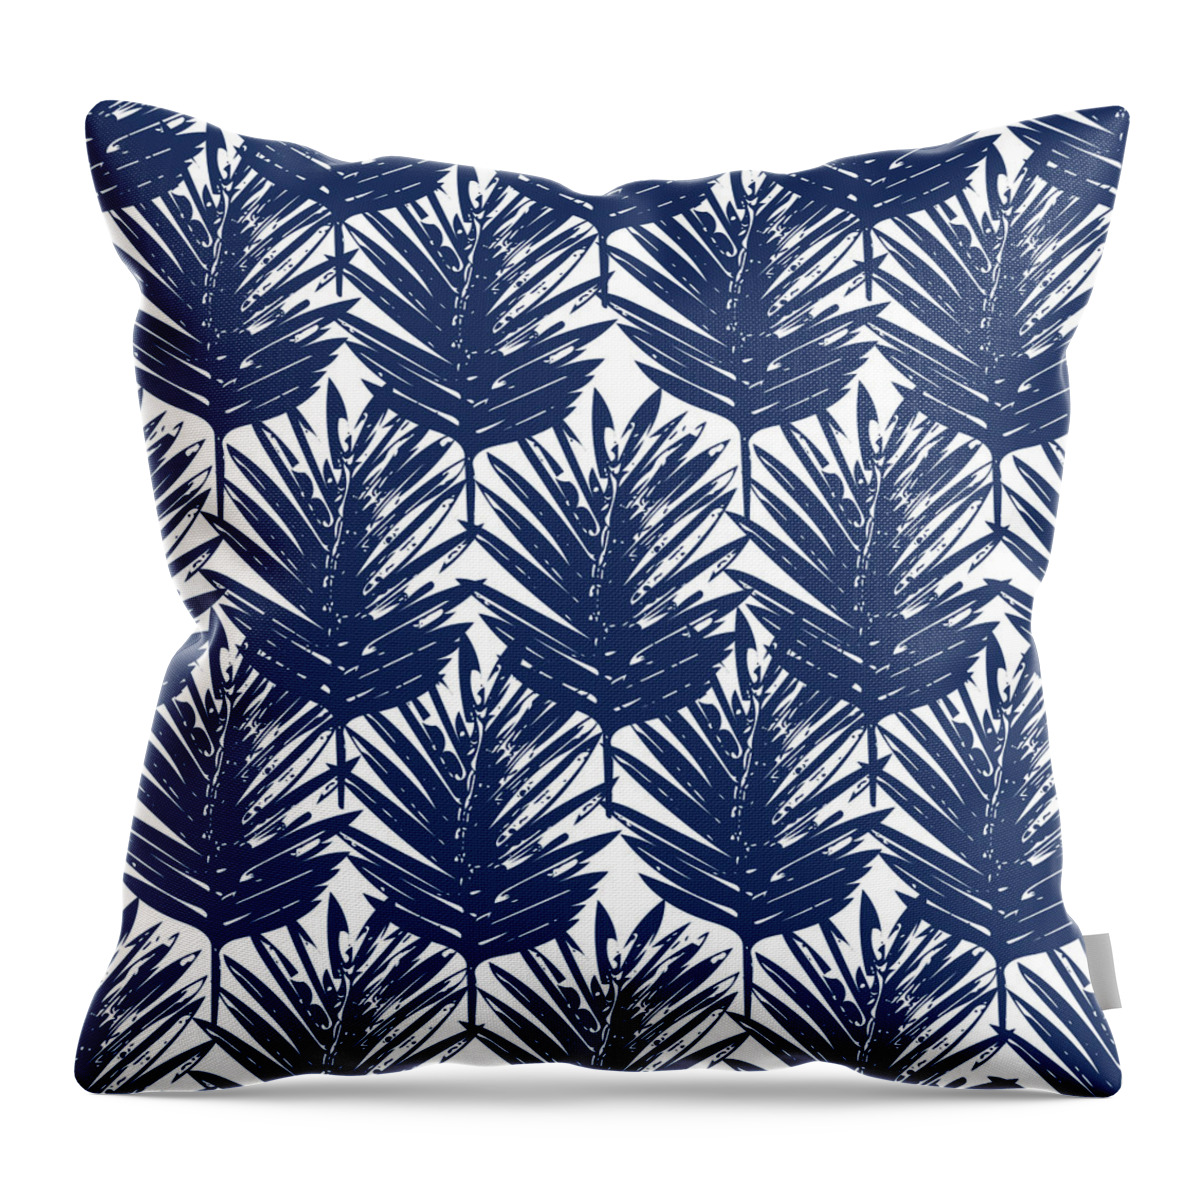 Palm Leaves Throw Pillow featuring the mixed media Blue and White Palm Leaves 3 - Art by Linda Woods by Linda Woods